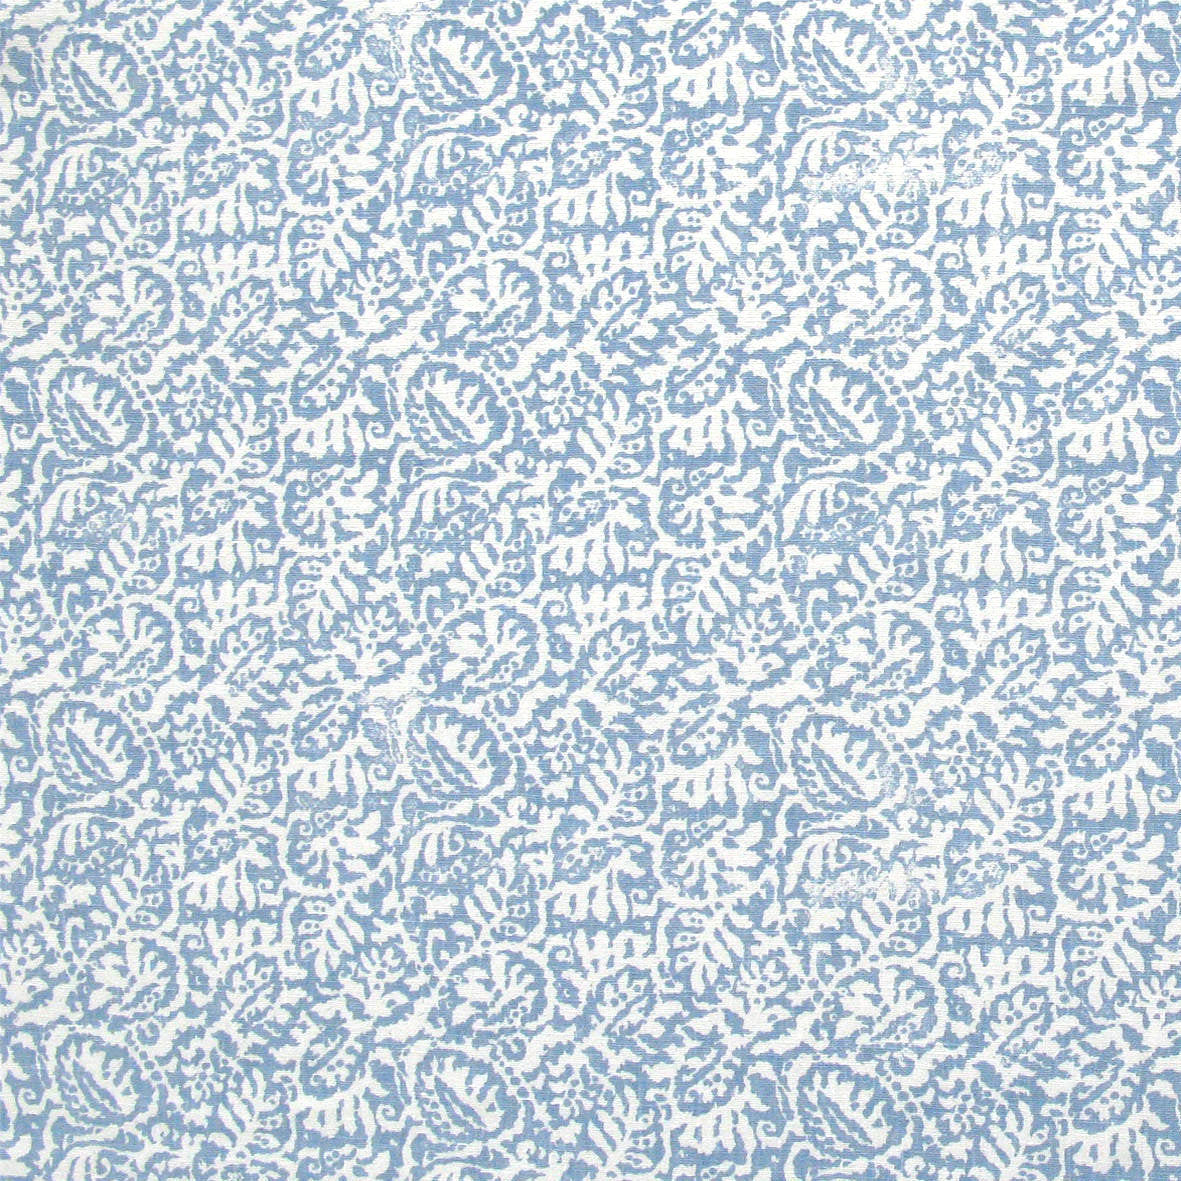 Detail of fabric in a dense paisley print in white on a light blue field.